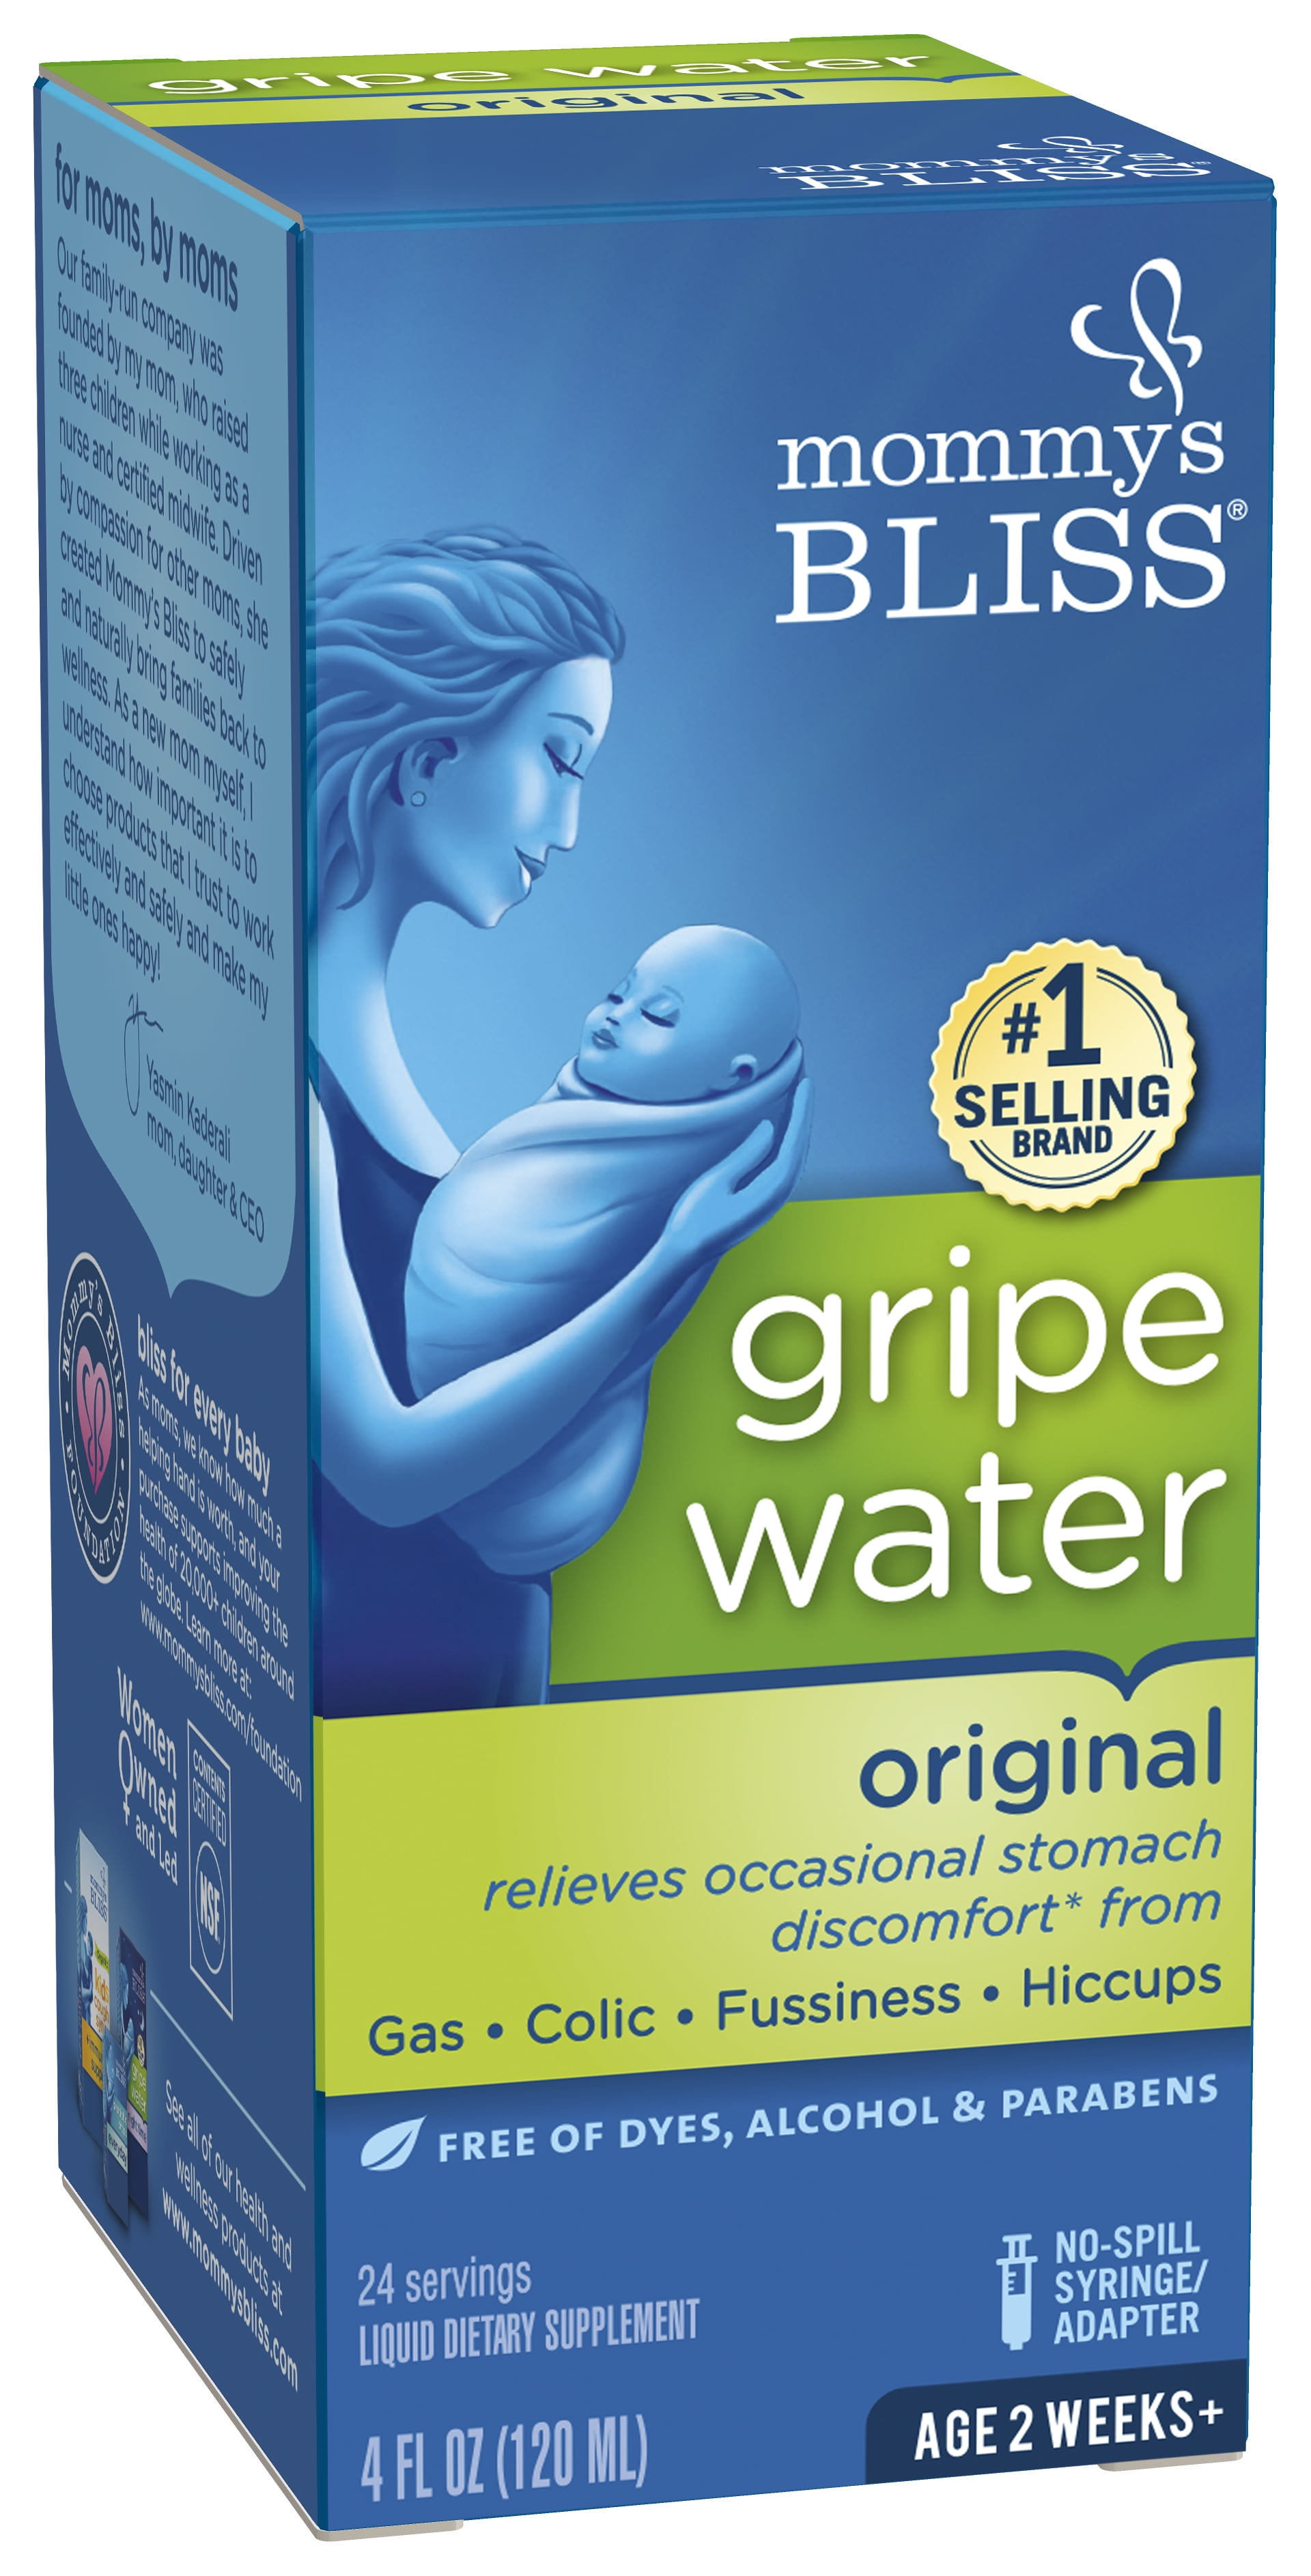 Mommy's Bliss Gripe Water Original, Relieves Stomach Discomfort,  Over-the-Counter, 4 fl oz